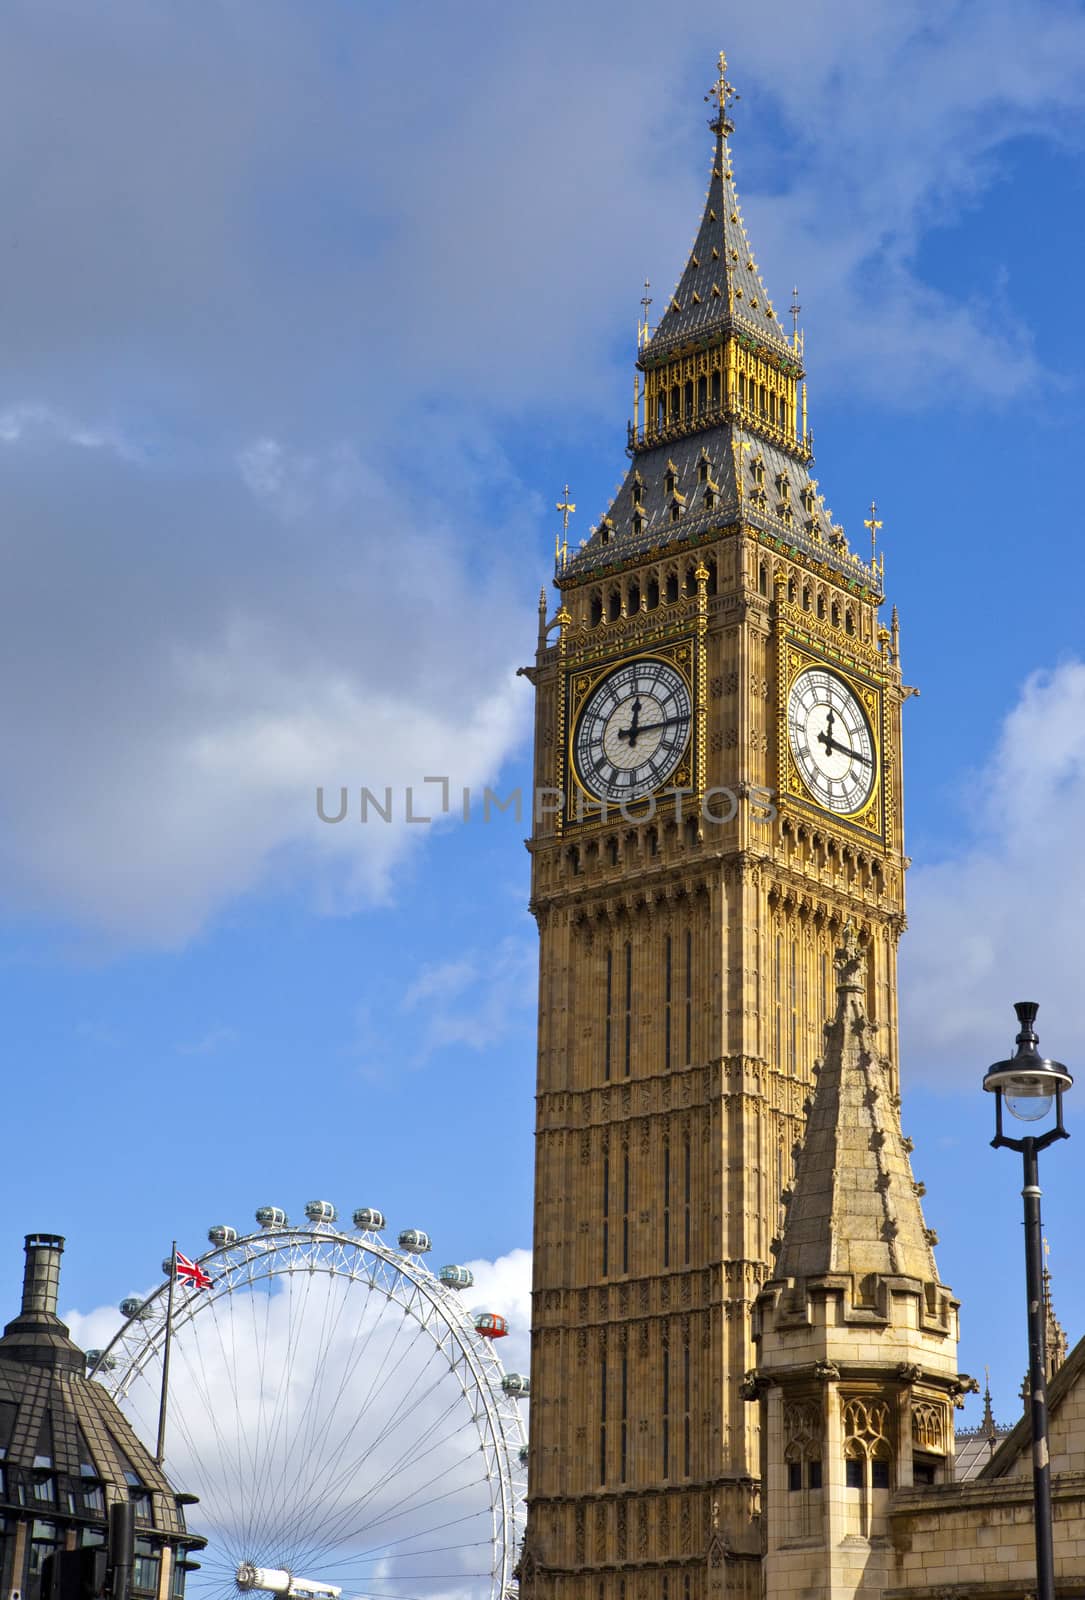 LONDON, UK - 27TH NOVEMBER 2014: A view of Big Ben and the London Eye in London.